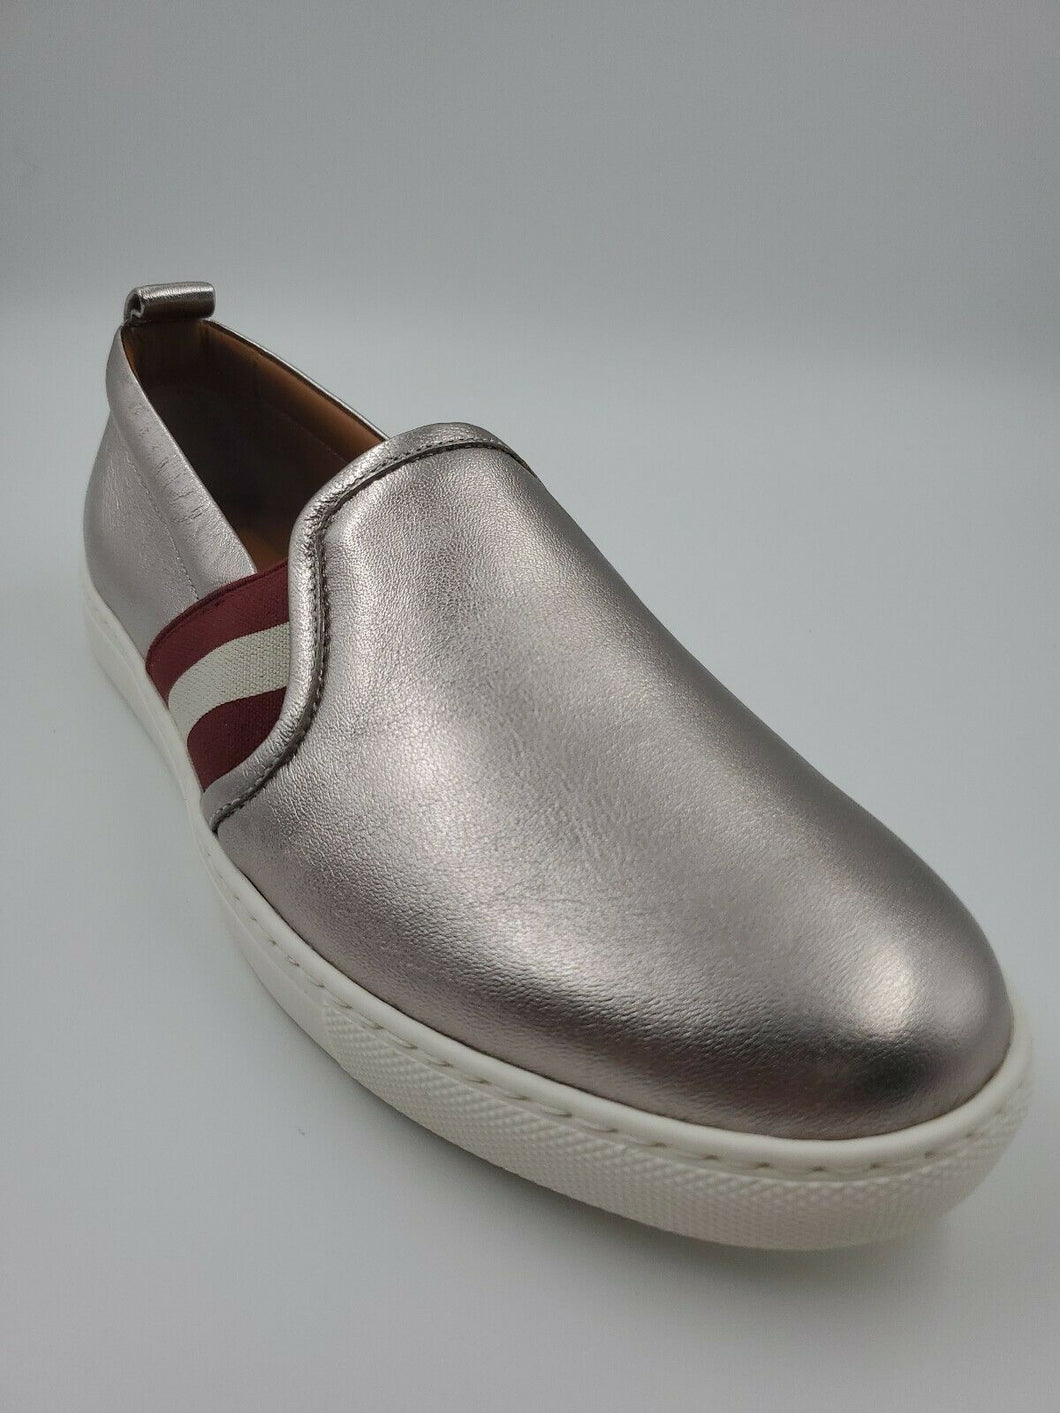 New Bally Women's Henrika Silver Lamb Leather Slip On Sneakers Italy US 4.5 MSRP $450